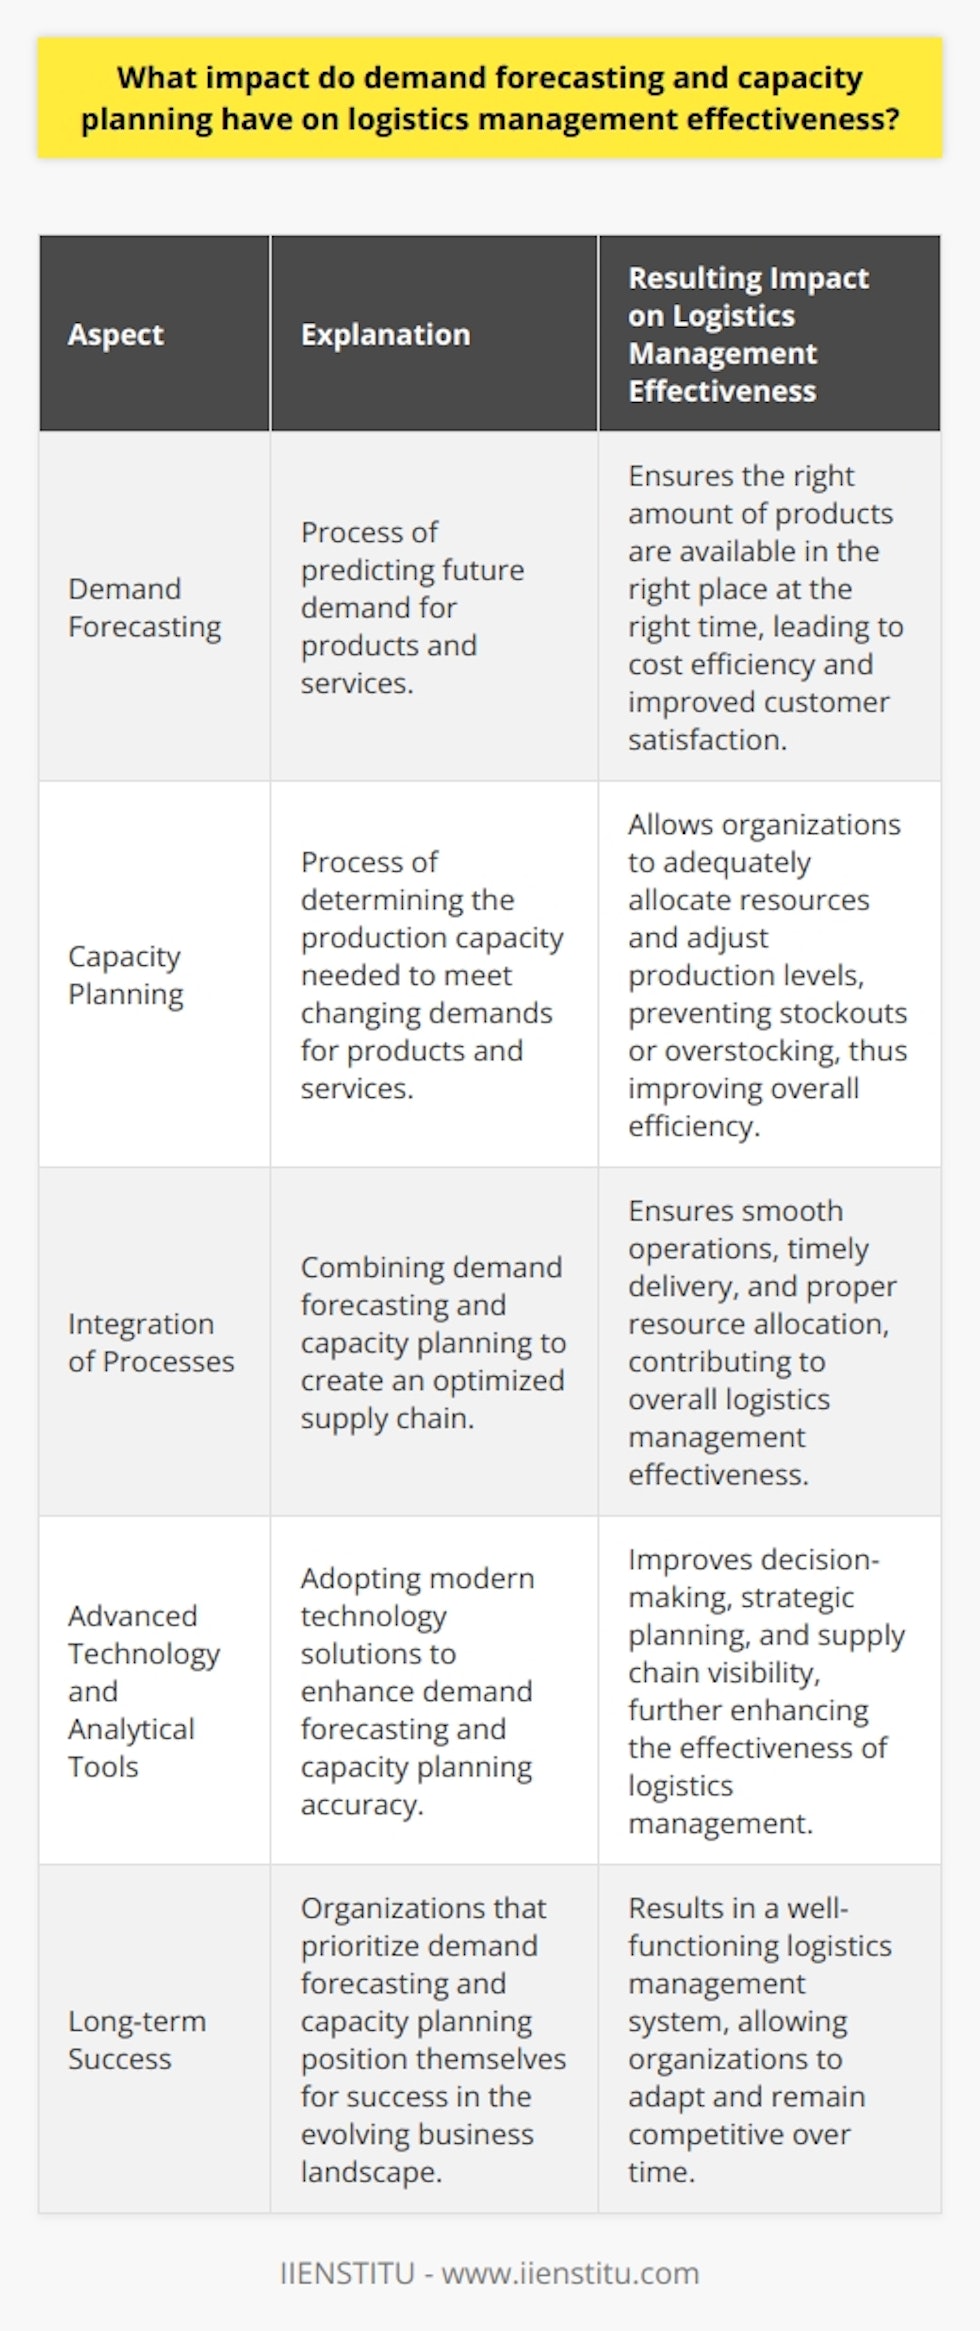 To summarize, the impact of demand forecasting and capacity planning on logistics management effectiveness is significant. These two processes, when integrated, lead to an optimized supply chain that meets market needs and customer satisfaction levels without incurring excessive costs. Adopting advanced technology and analytical tools enhances this effectiveness further, providing accurate data for decision-making and strategic planning. Organizations that prioritize and invest in these areas will benefit from a well-functioning logistics management system, positioning themselves for long-term success in the ever-evolving business landscape.